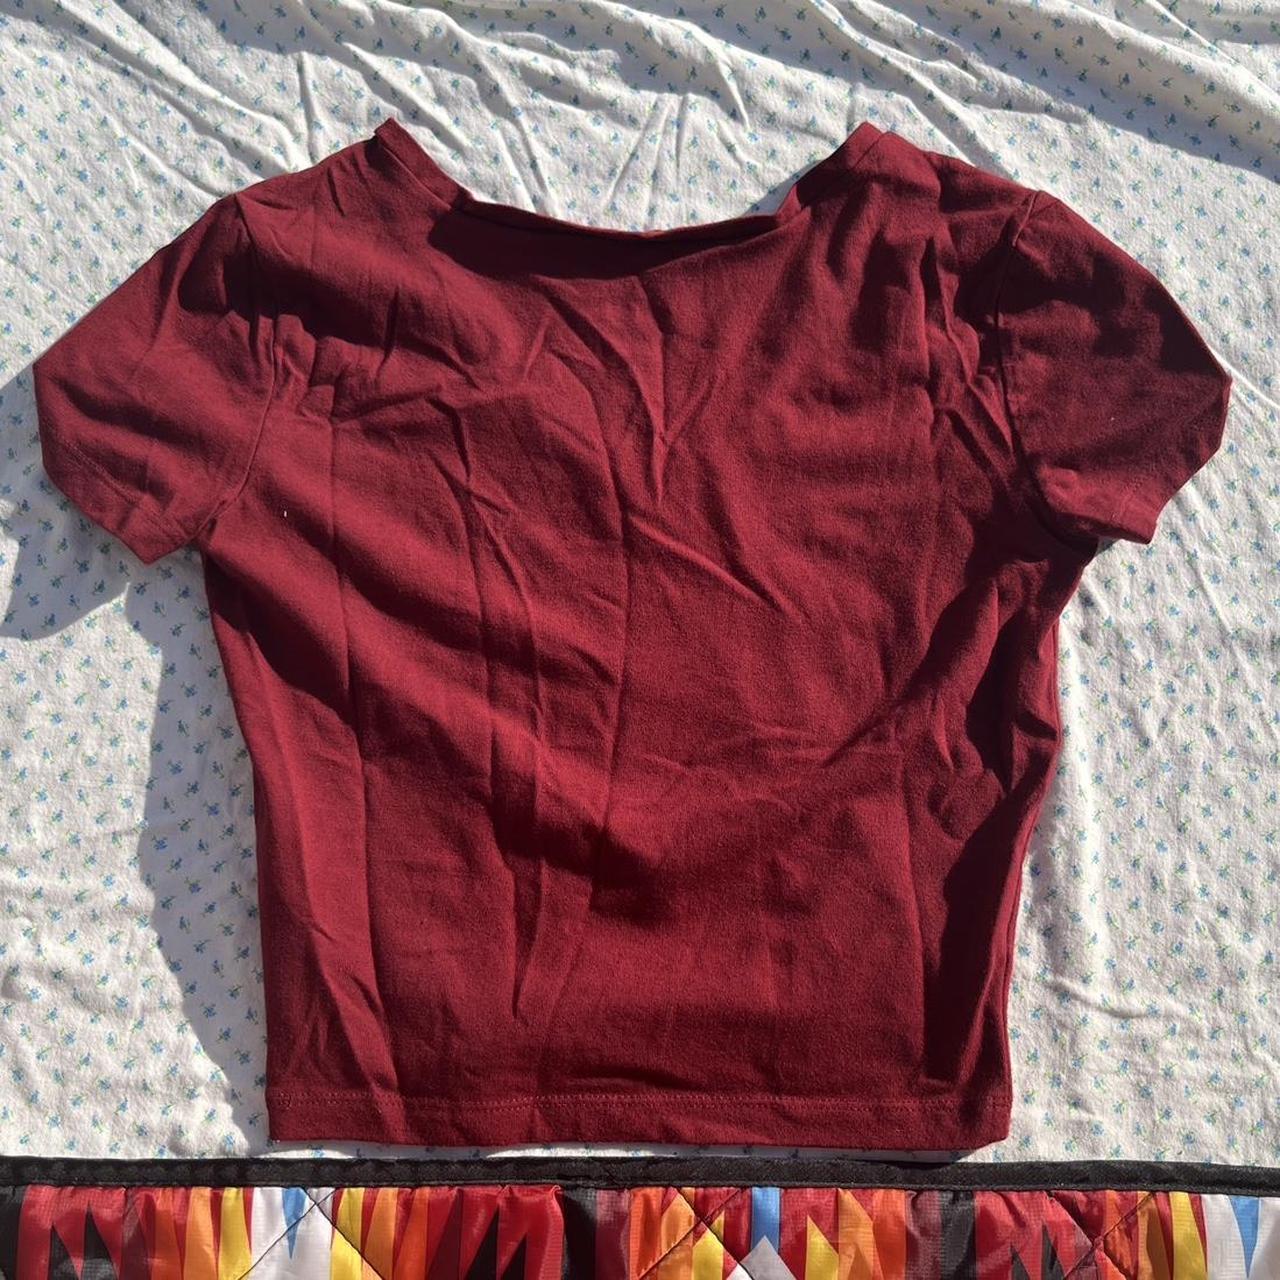 WILD FABLE SIZE SMALL BARELY WORN GREAT... Depop